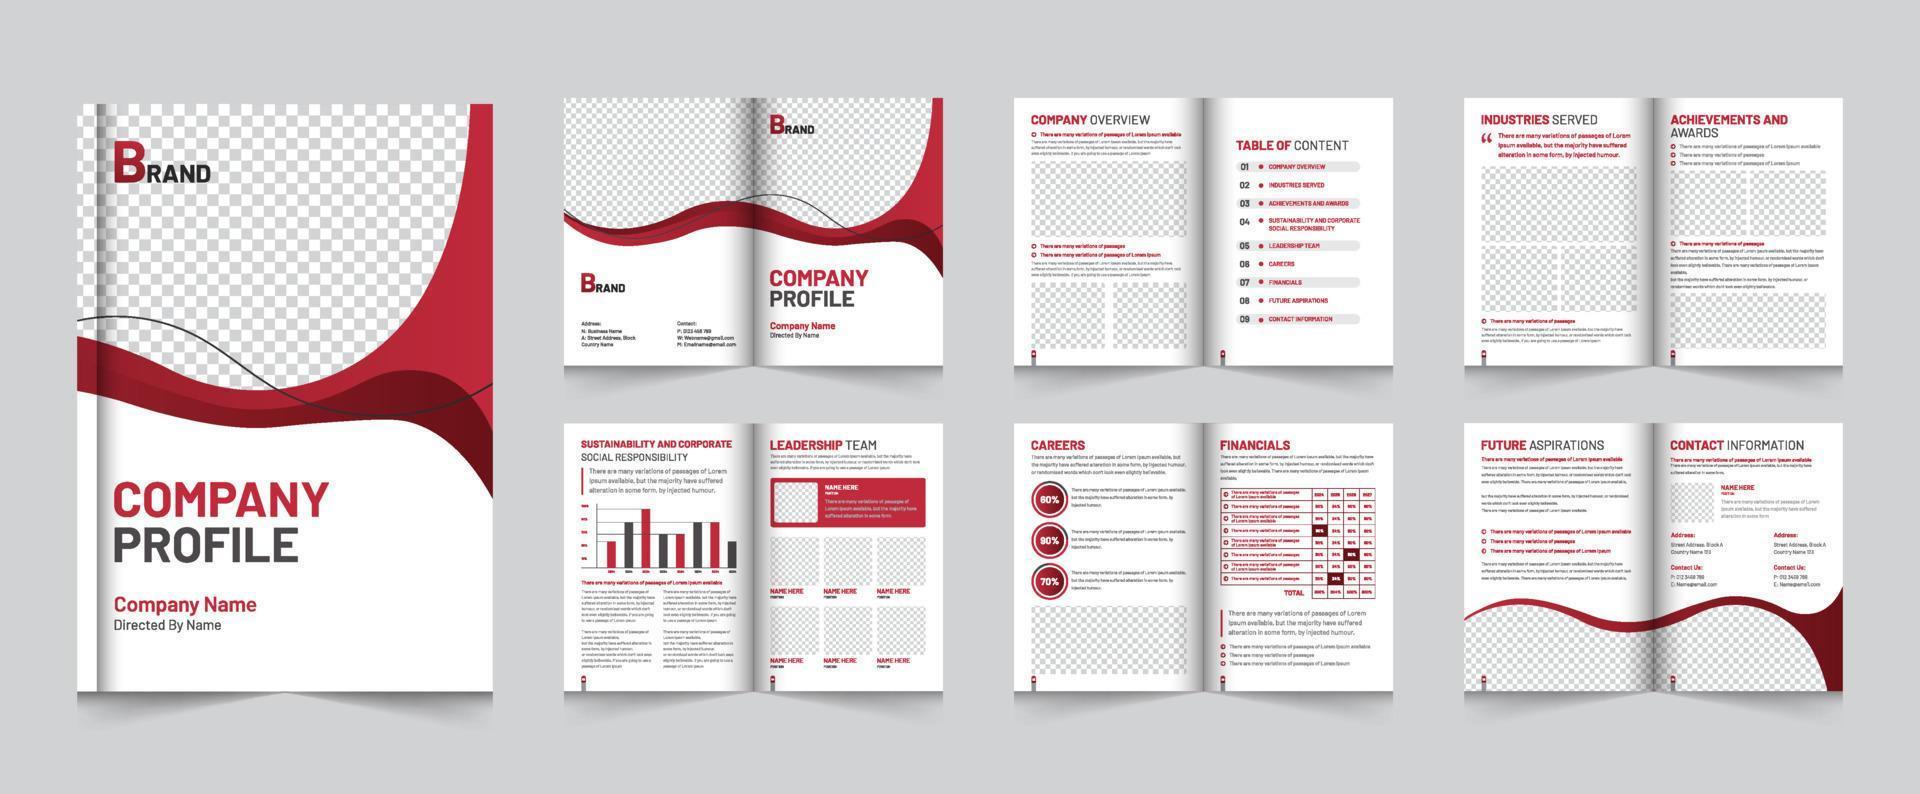 layout, pages corporate and Business  Company Profile Template Design vector